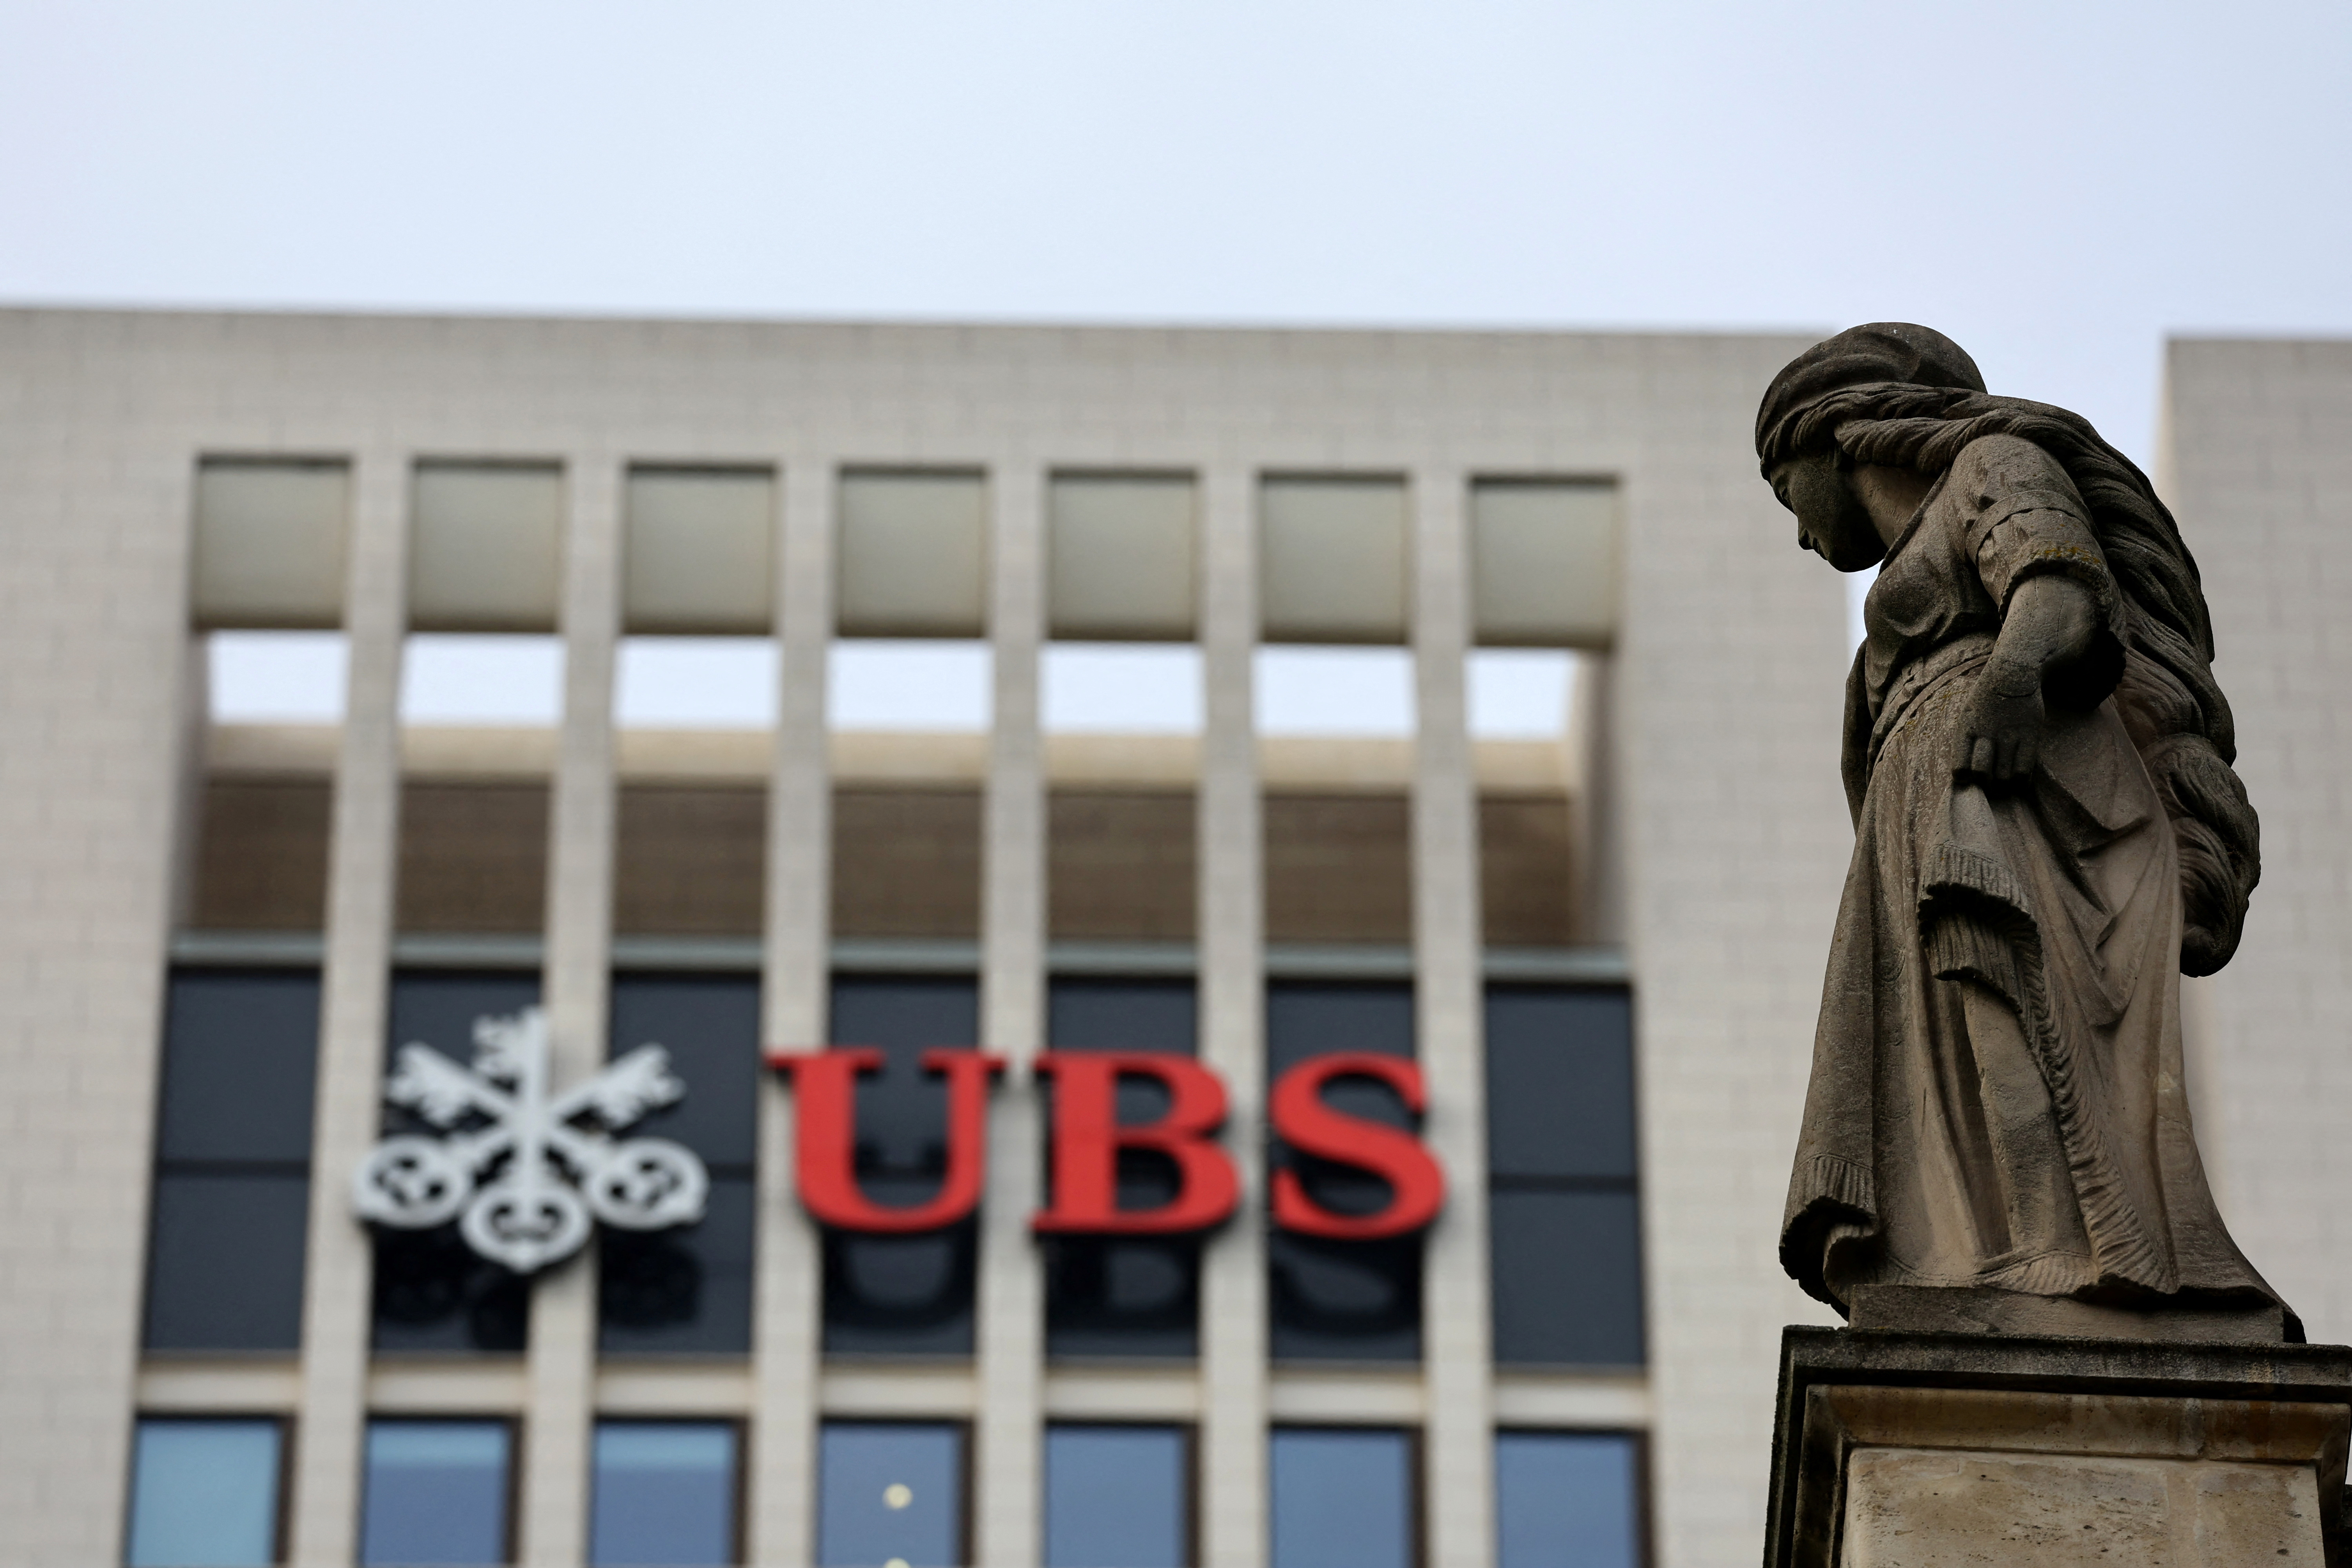 German officials search UBS bank in Russian oligarch probe